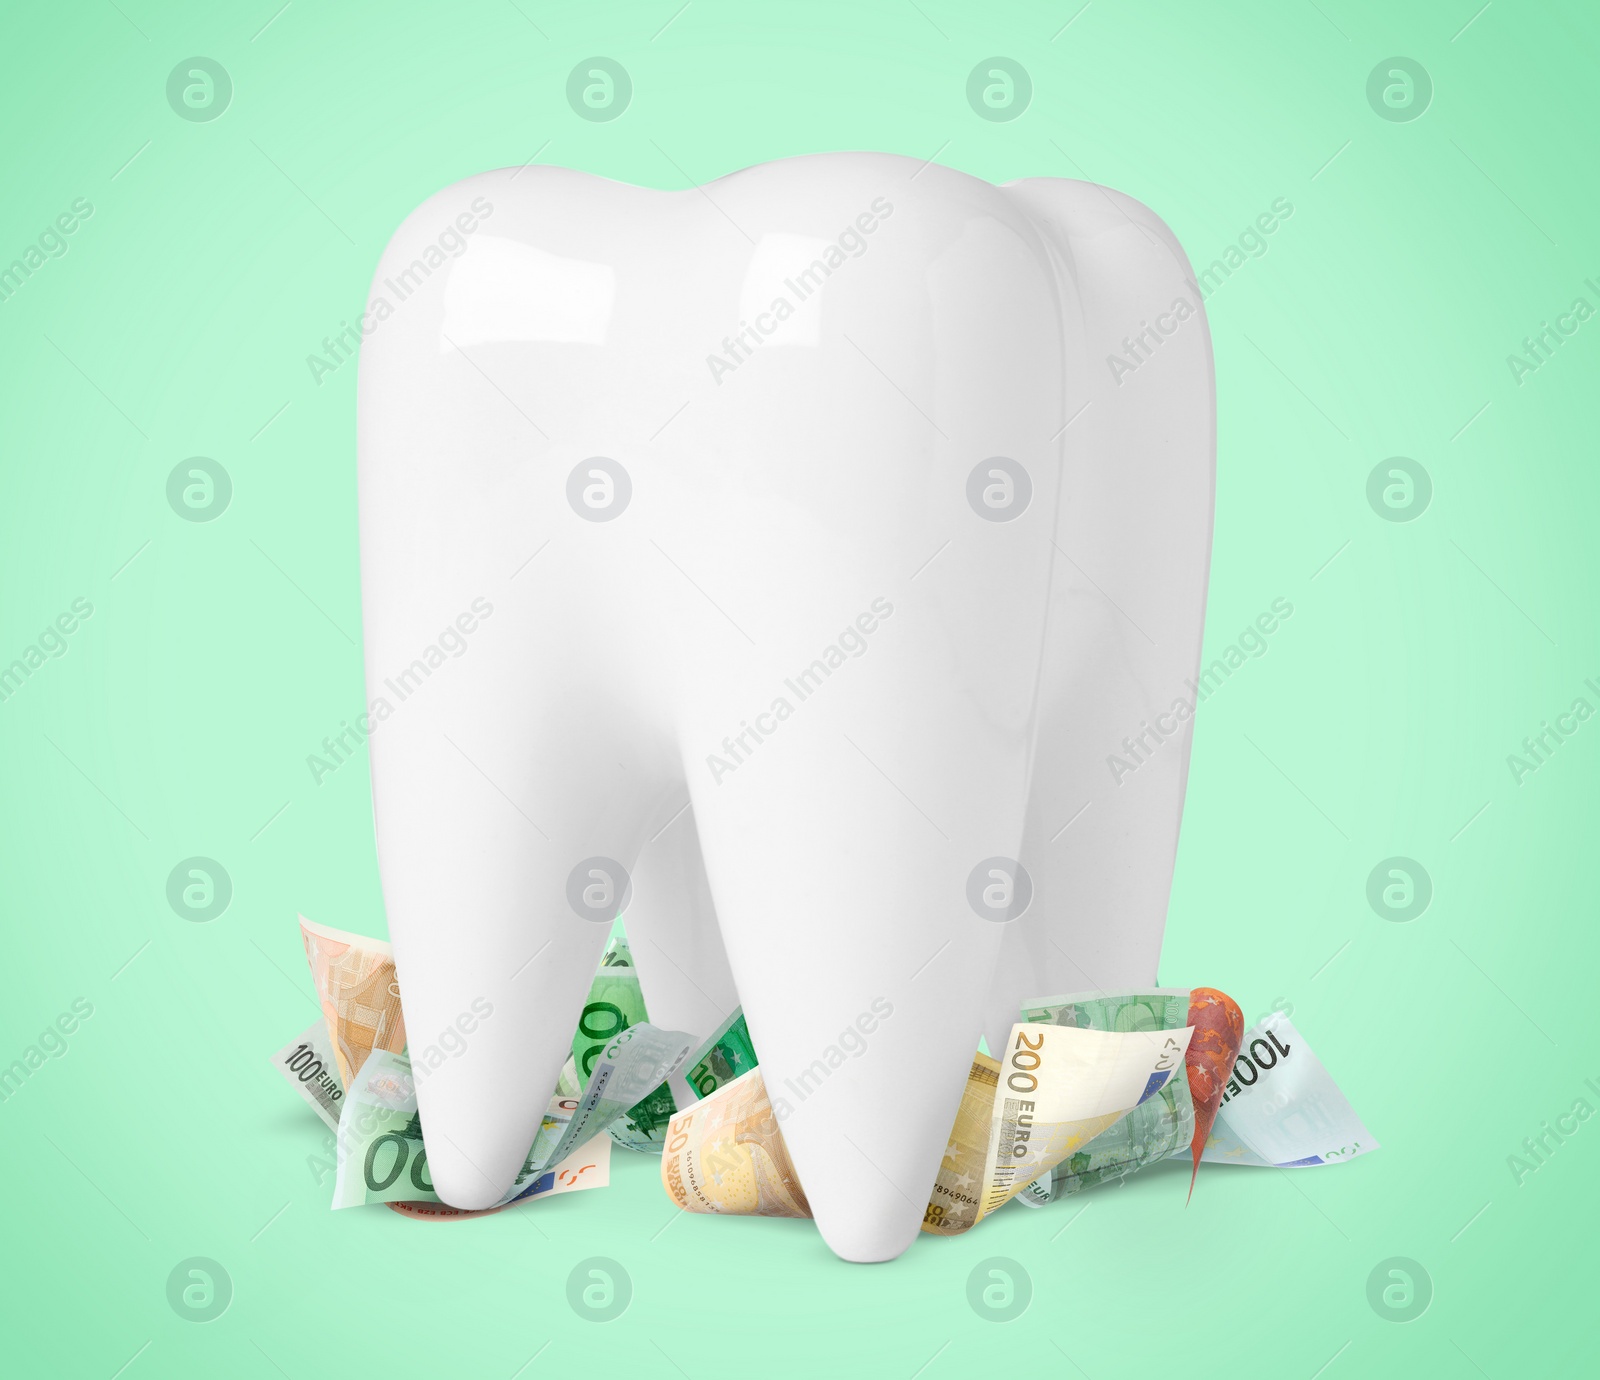 Image of Model of tooth and euro banknotes on turquoise background. Concept of expensive dental procedures